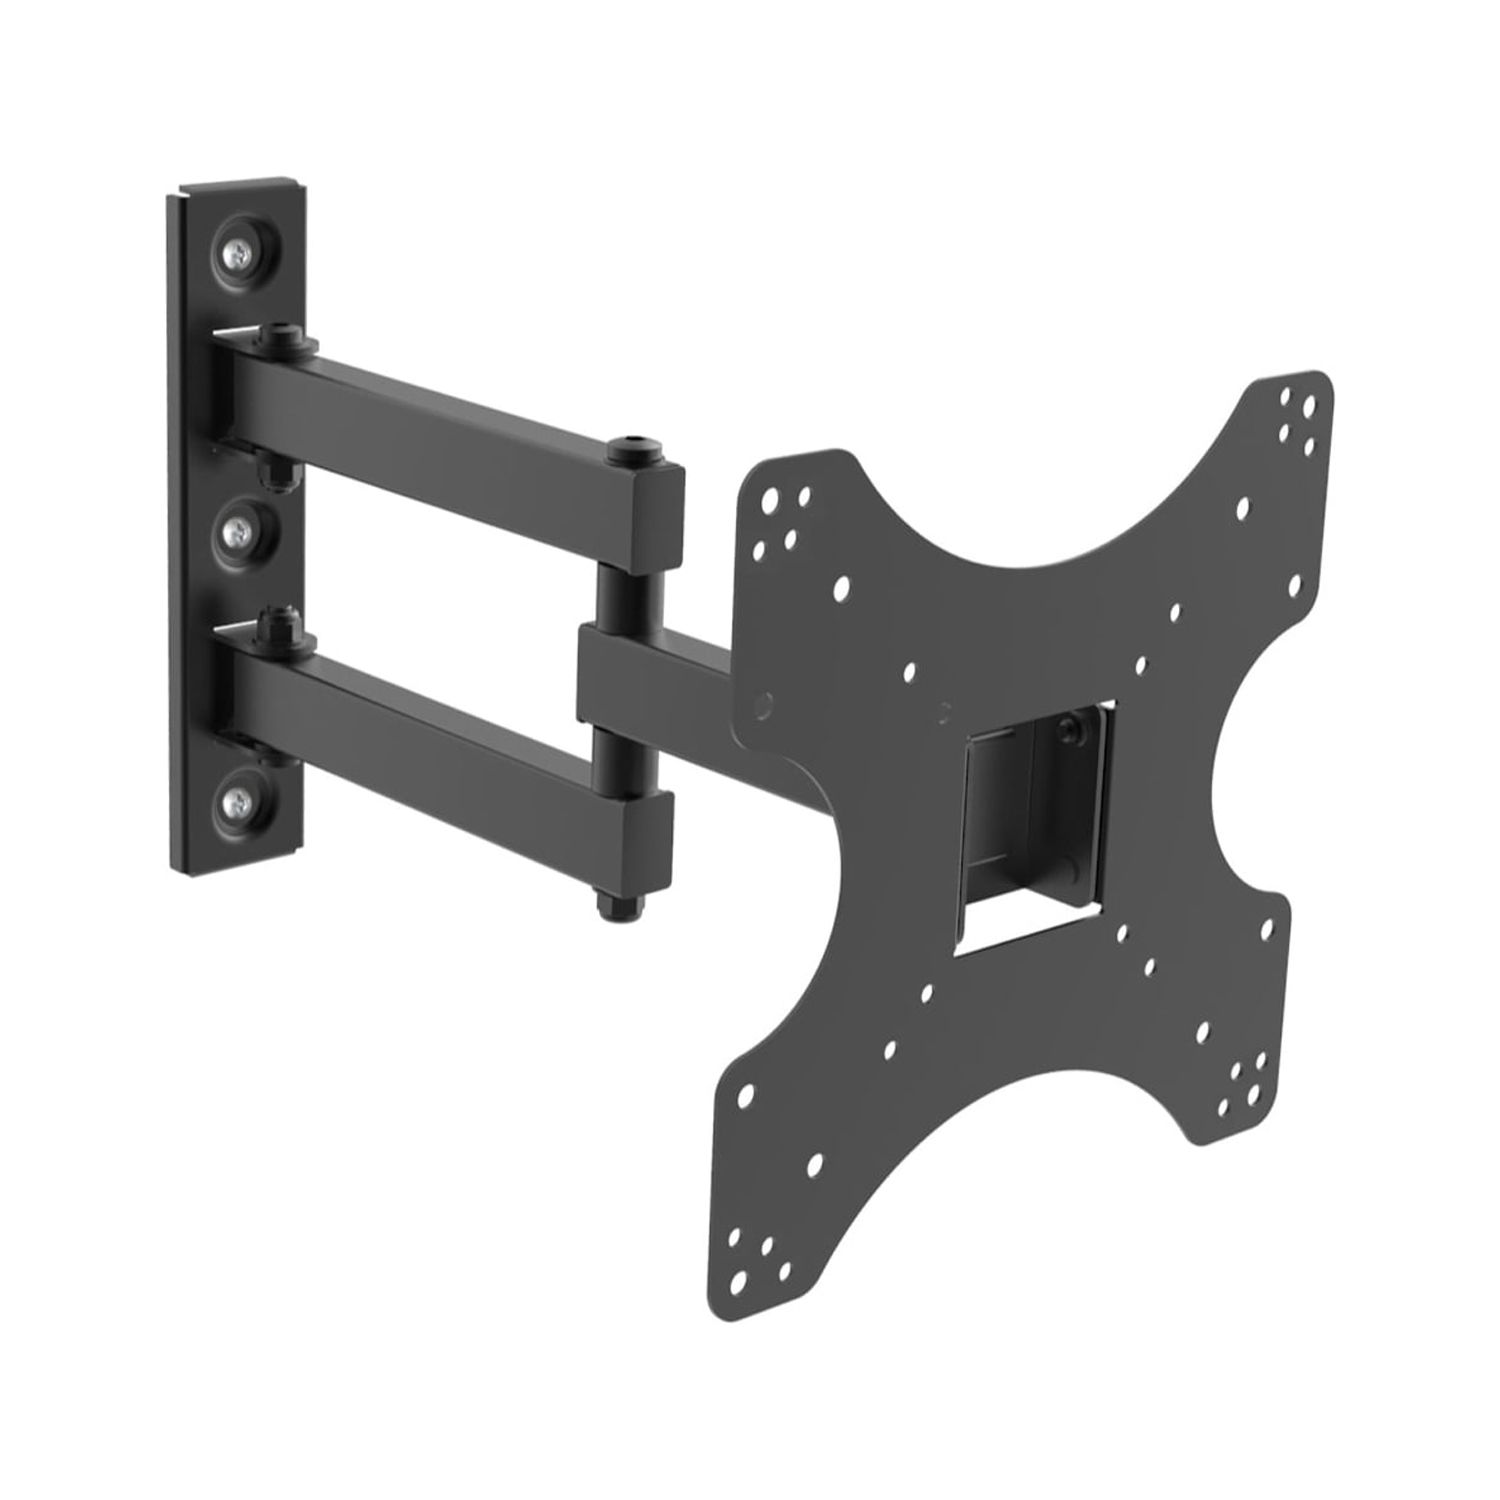 Expert Connect | TV Wall Mount Bracket | 17 - 42" | Full Motion Articulating | Tilt & Swivel & Rotation Adjustment | Max VESA 200x200mm | For LED, LCD, OLED and Flat Screen TVs Up to 50 lbs - image 1 of 4